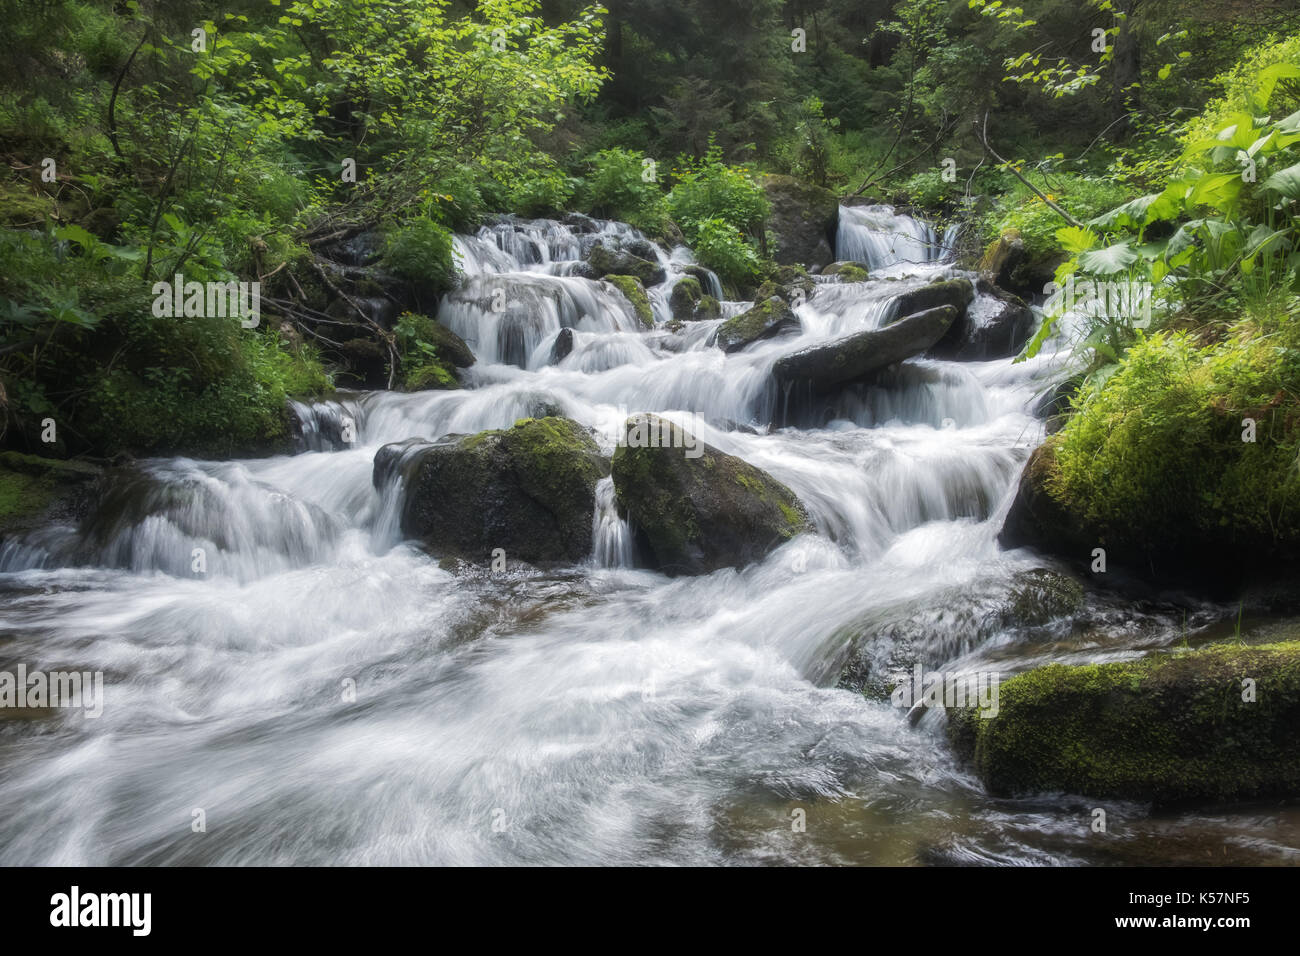 Beauty waterfall on mountain in summer time. Flowing water in the lush forest. Wilderness scene Stock Photo